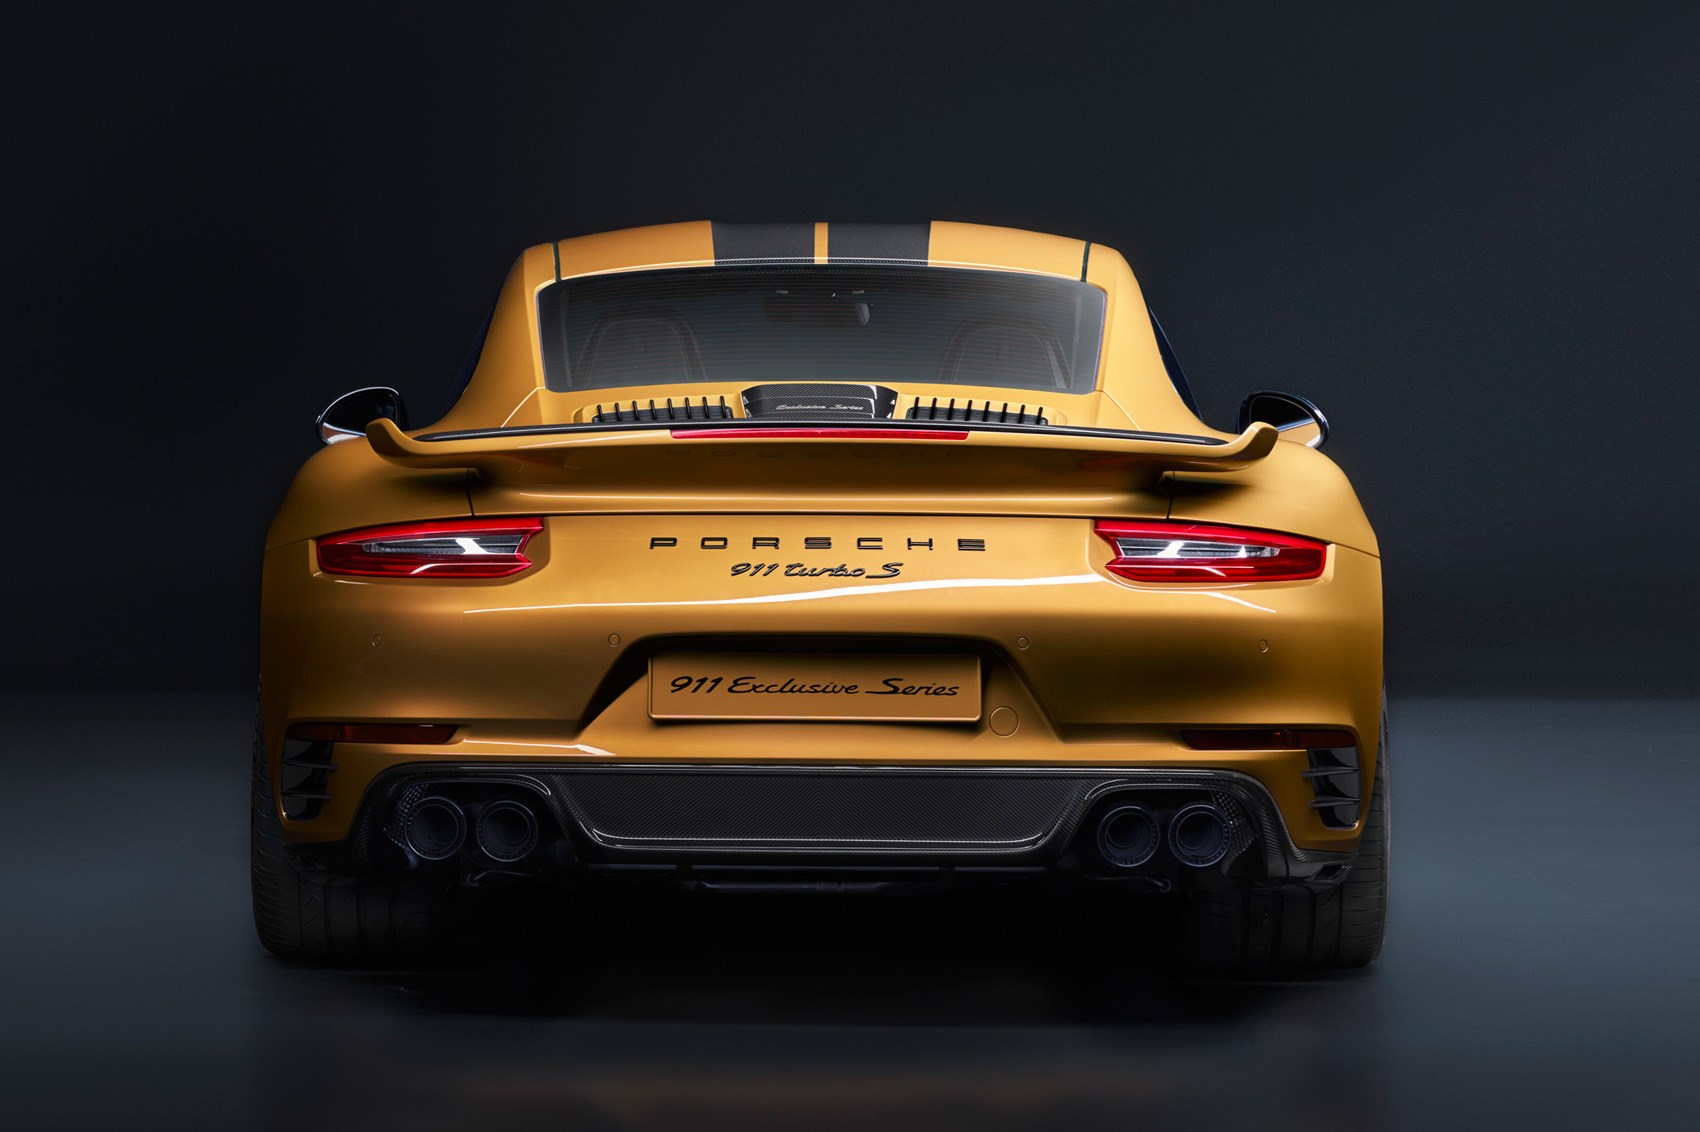 Porsche 911 Turbo S Exclusive Series The Most Powerful 911